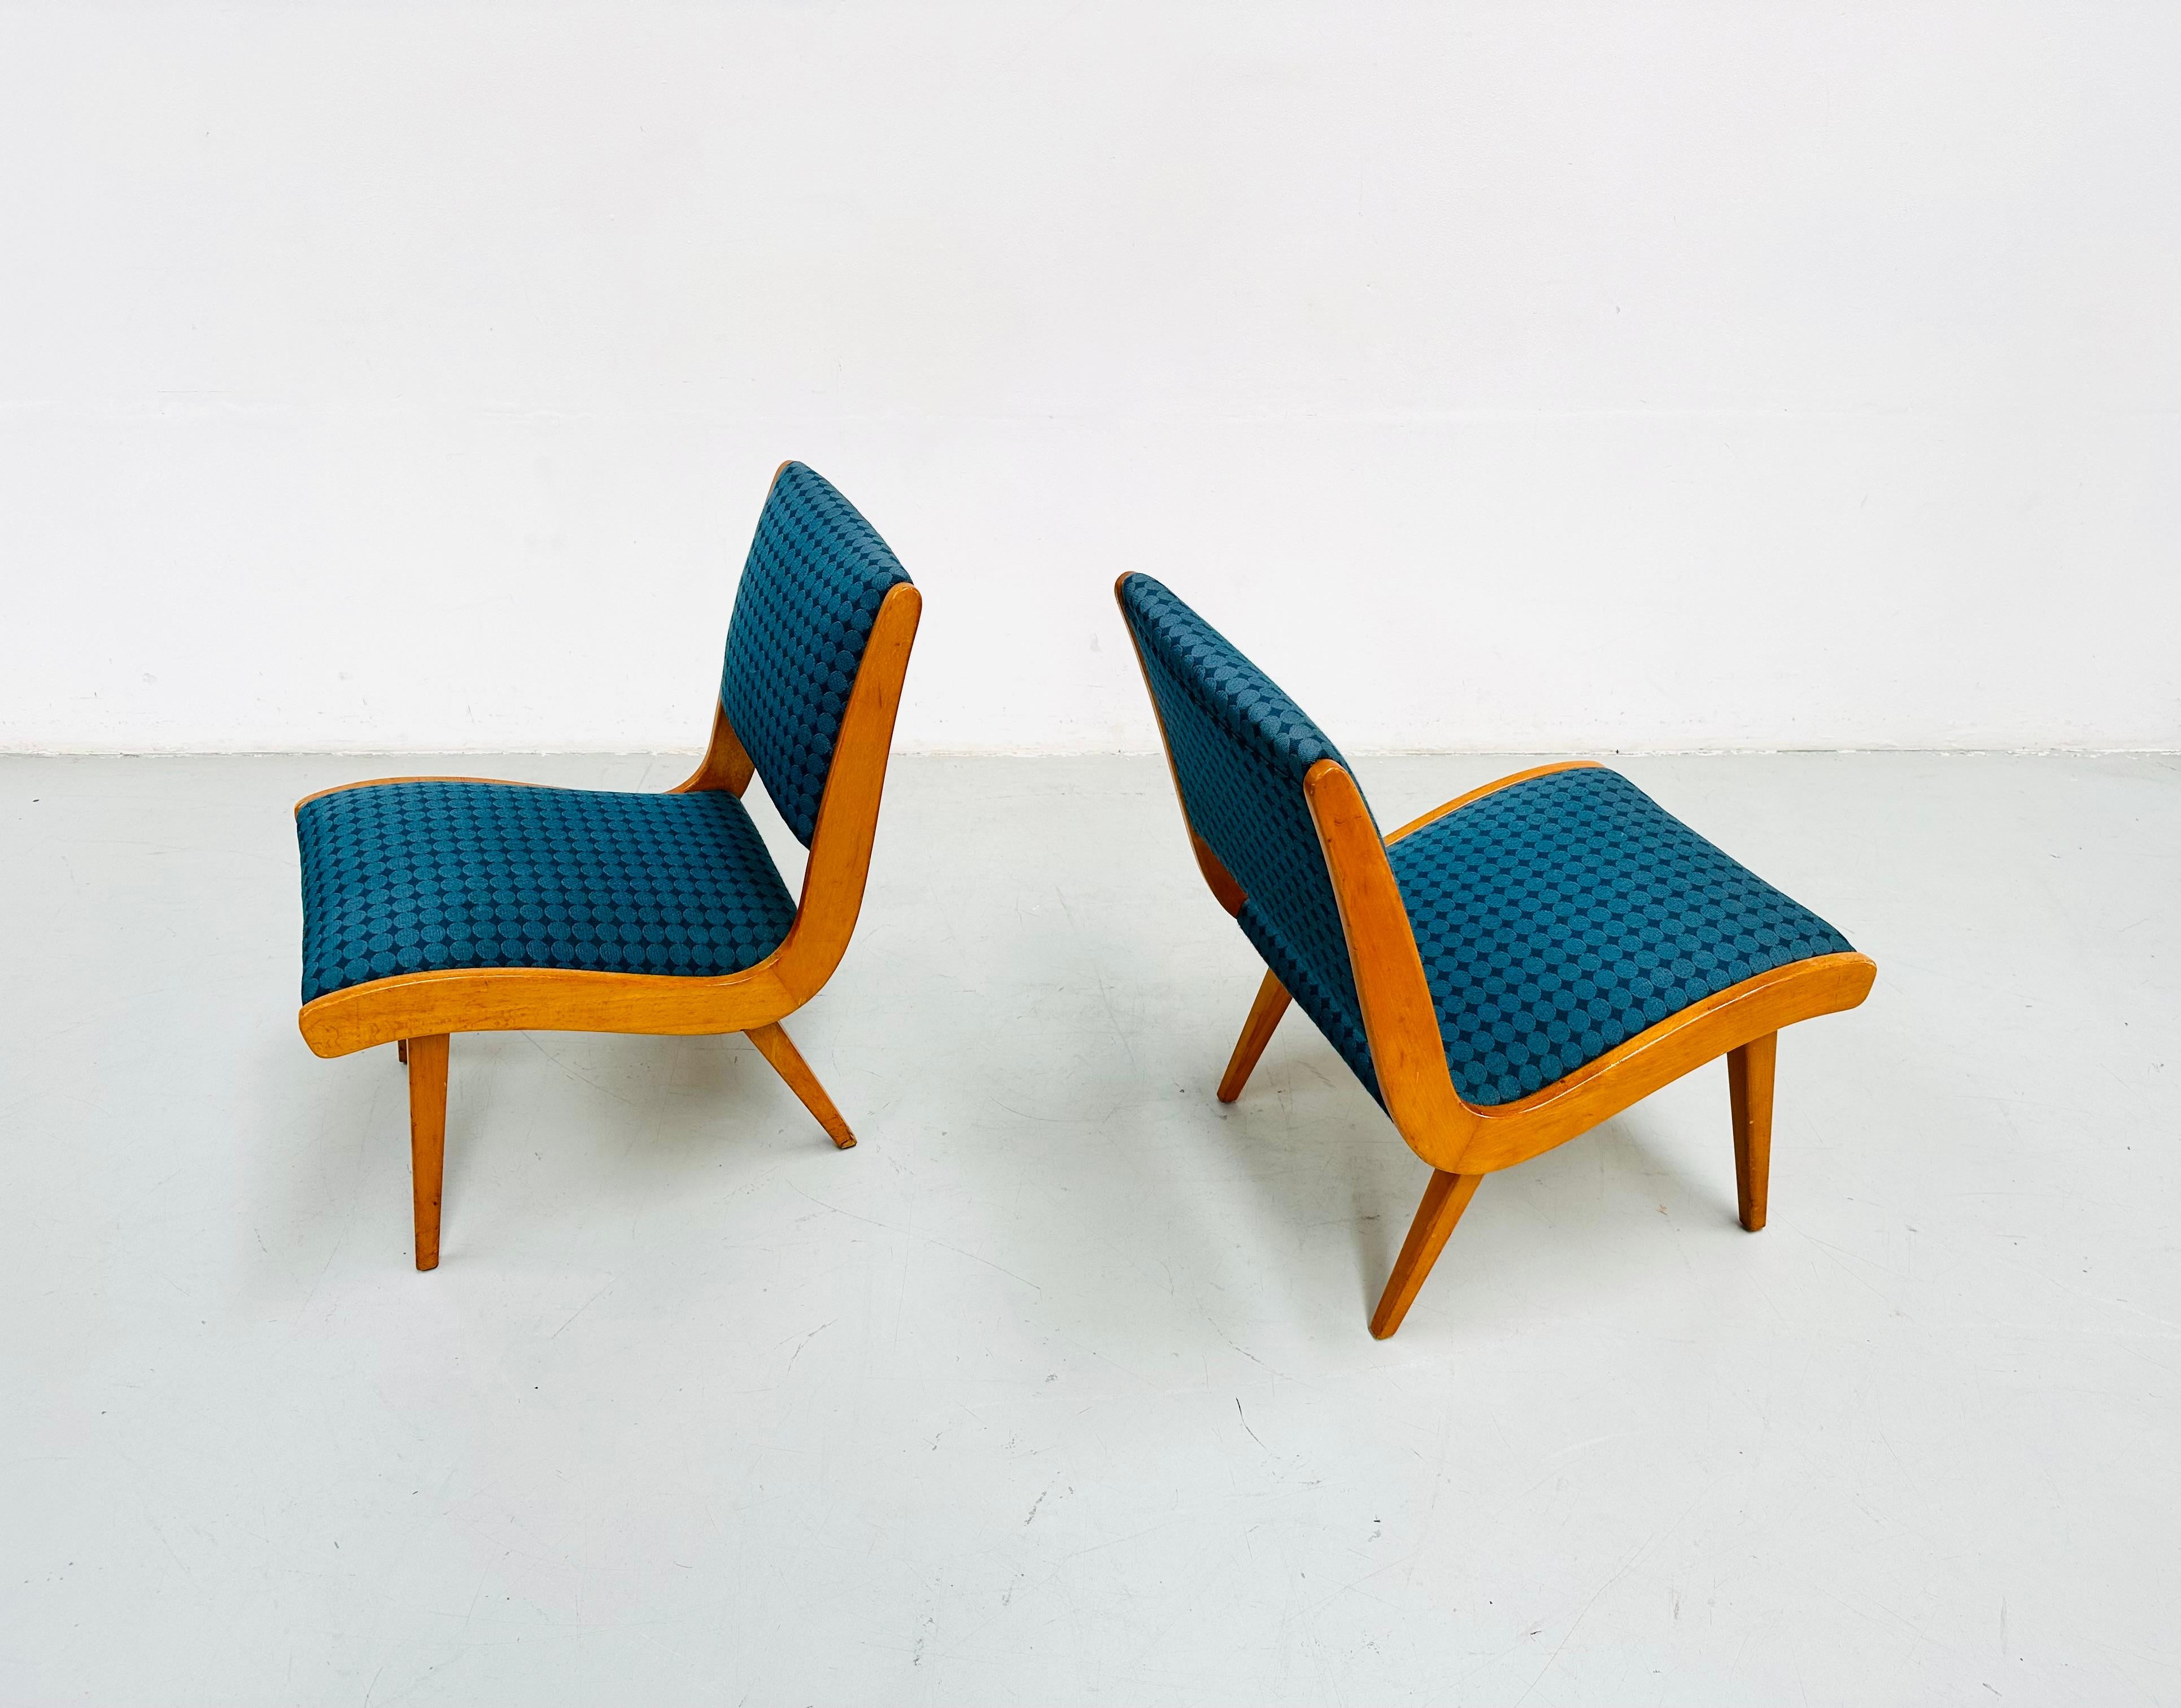 1950s Rare Set Vostra Chairs Numbered & Original Fabric by Jens Risom for Knoll. en vente 8